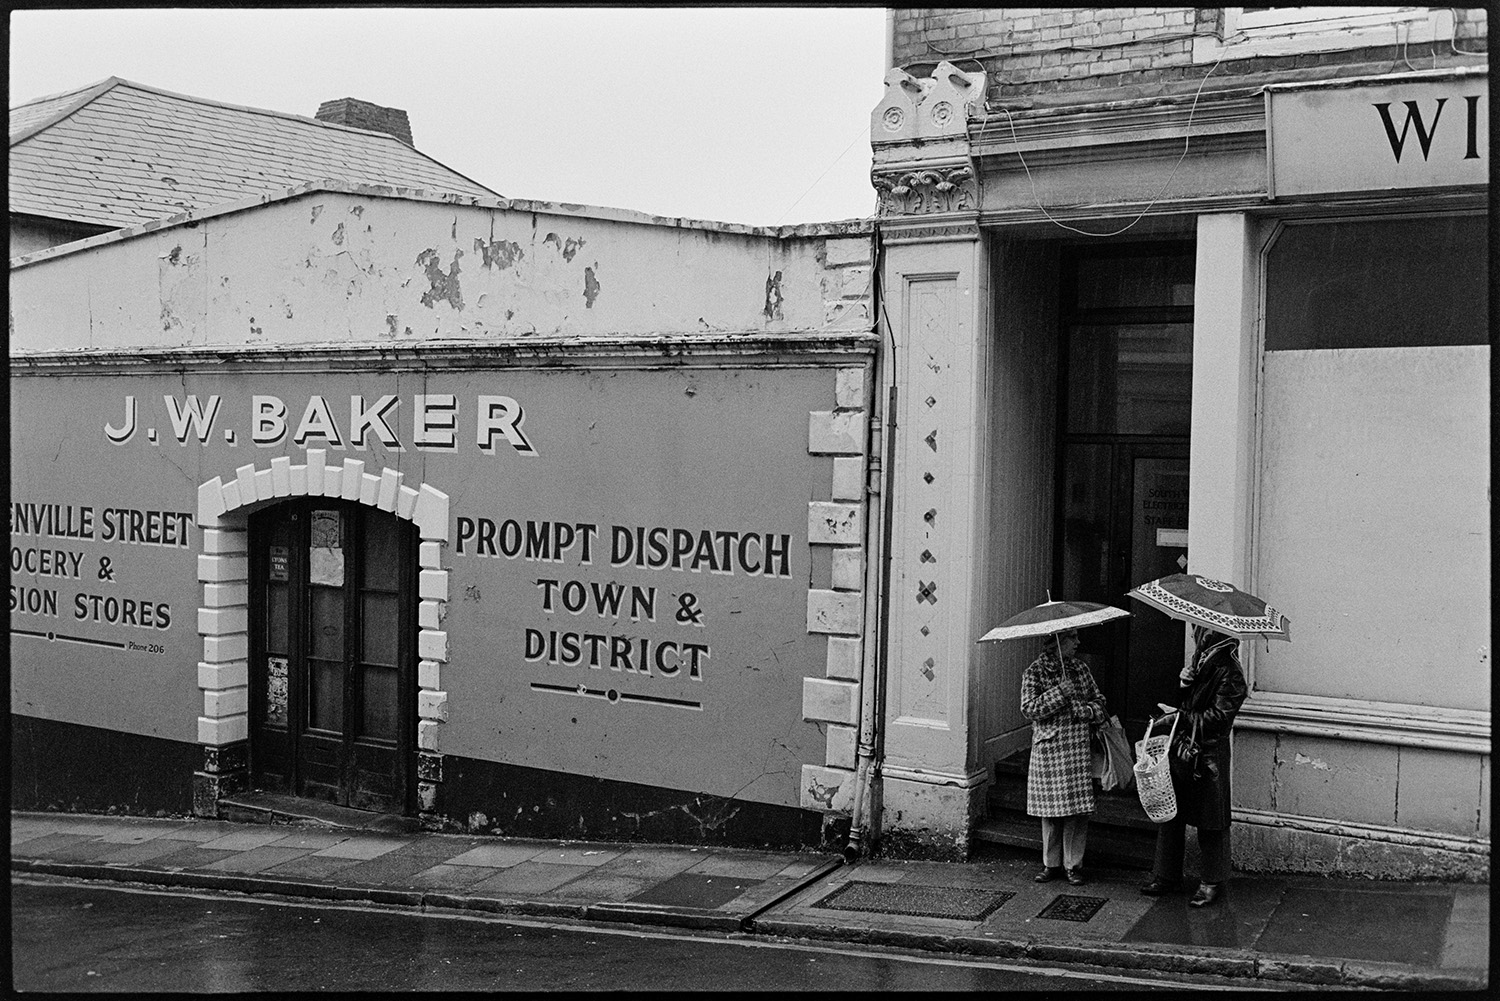 Sign outside Grocery stores in street with passers by. 
[Two people taking in Buttgarden Street, Bideford outside J W Baker, Grocery Stores, in the rain. They are both holding umbrellas.]